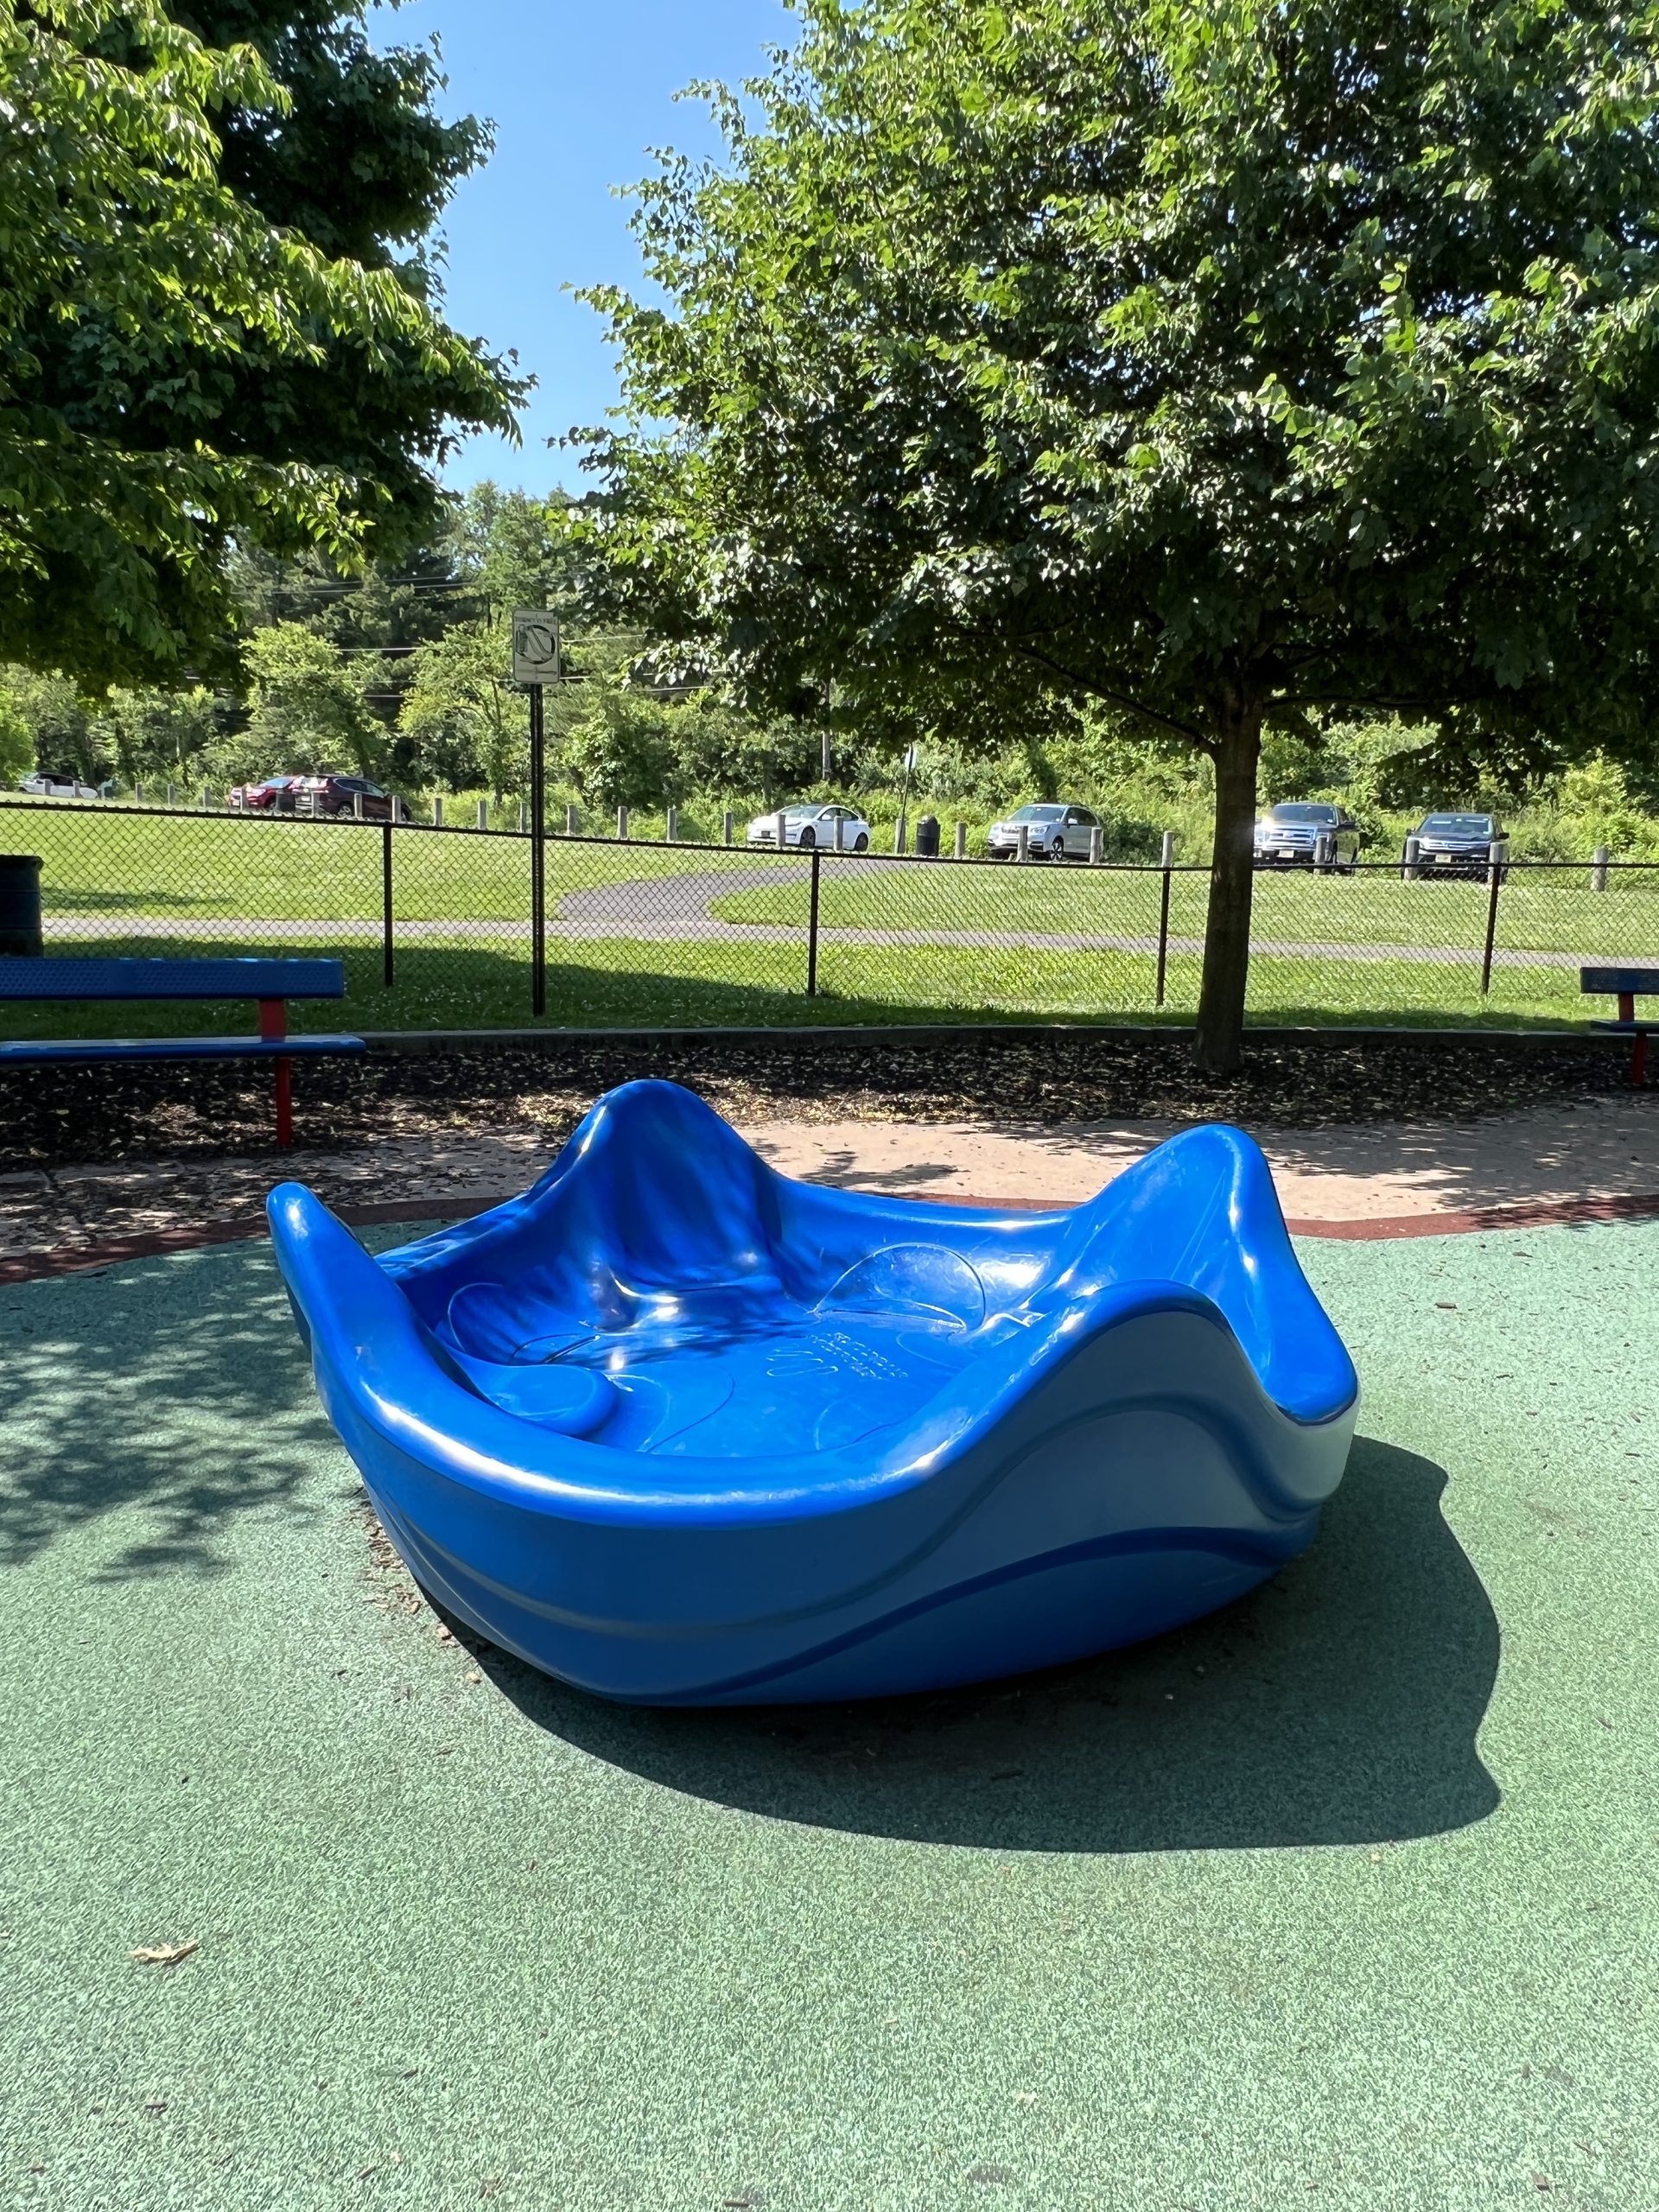 Jakes-Place-Playground-in-Cherry-Hill-NJ-high-back-spinner